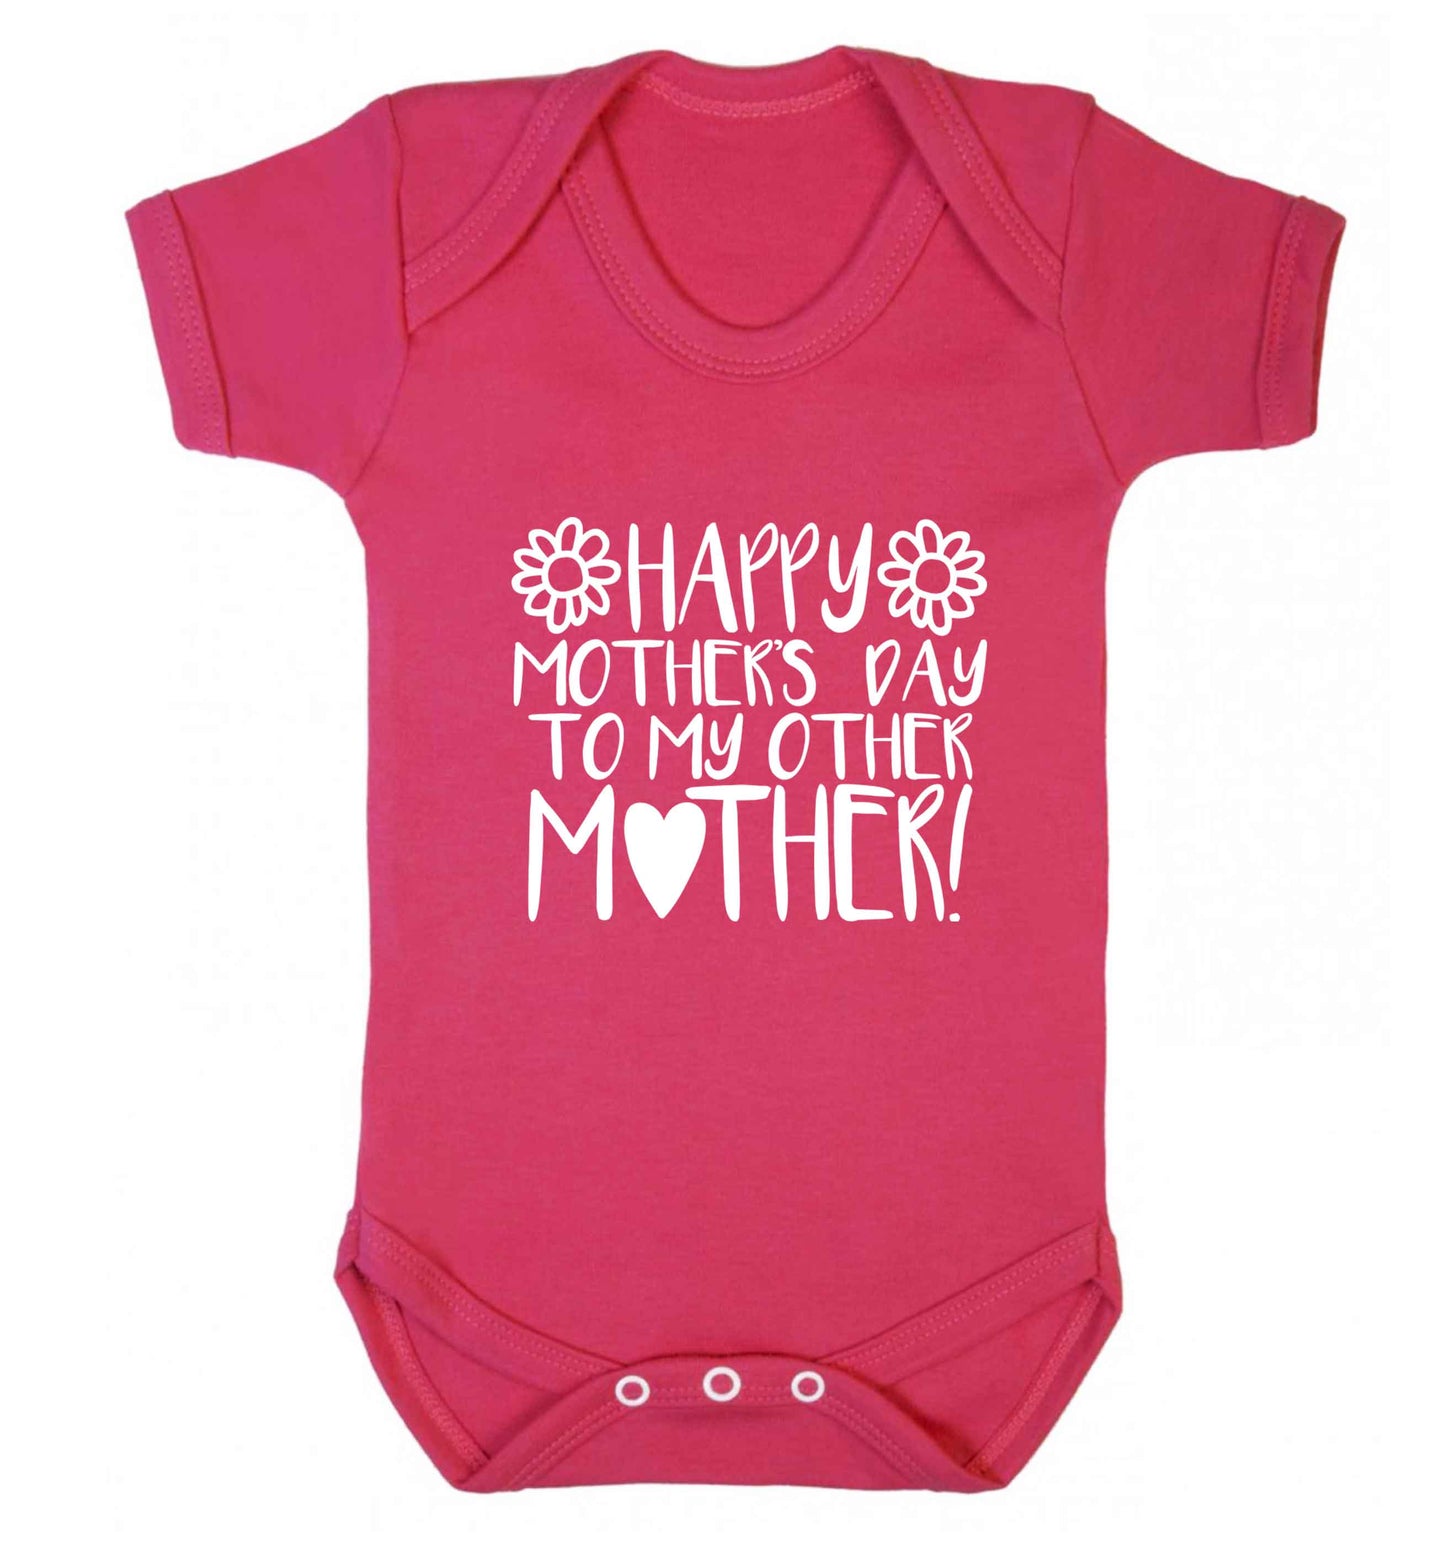 Happy mother's day to my other mother baby vest dark pink 18-24 months